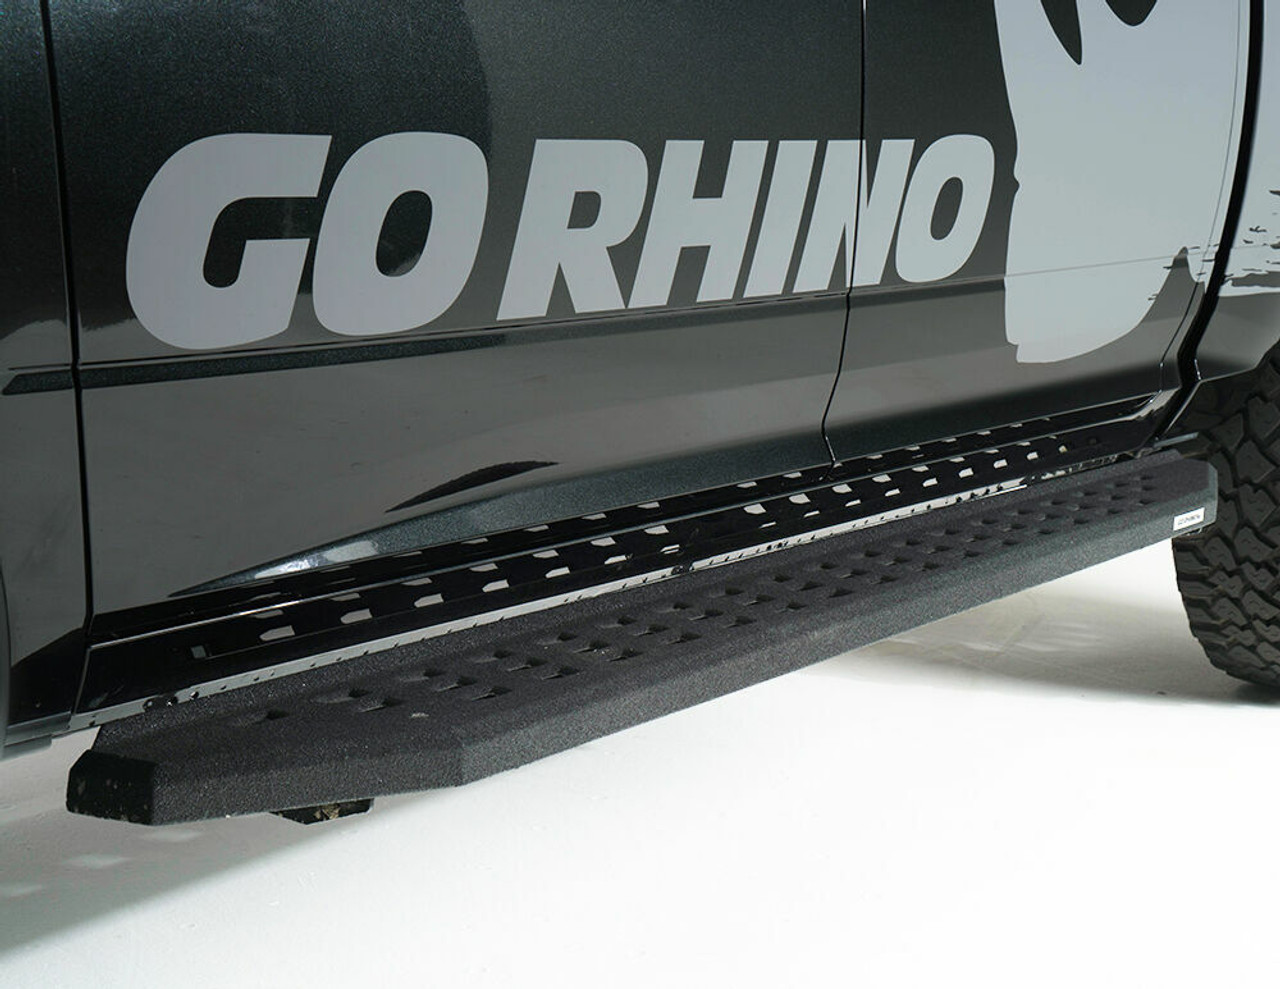 Go Rhino 6941768020T Ford, F-250, F-350, 1999-2016, RB20 Running Boards - Complete Kit: RB20 Boards + Brackets + 2 pair RB20 Drop Steps, Galvanized Steel, Protective Bedliner coating, 69400080T RB20 + 6941765 RB Brackets + (2) 69420000T Drop Steps